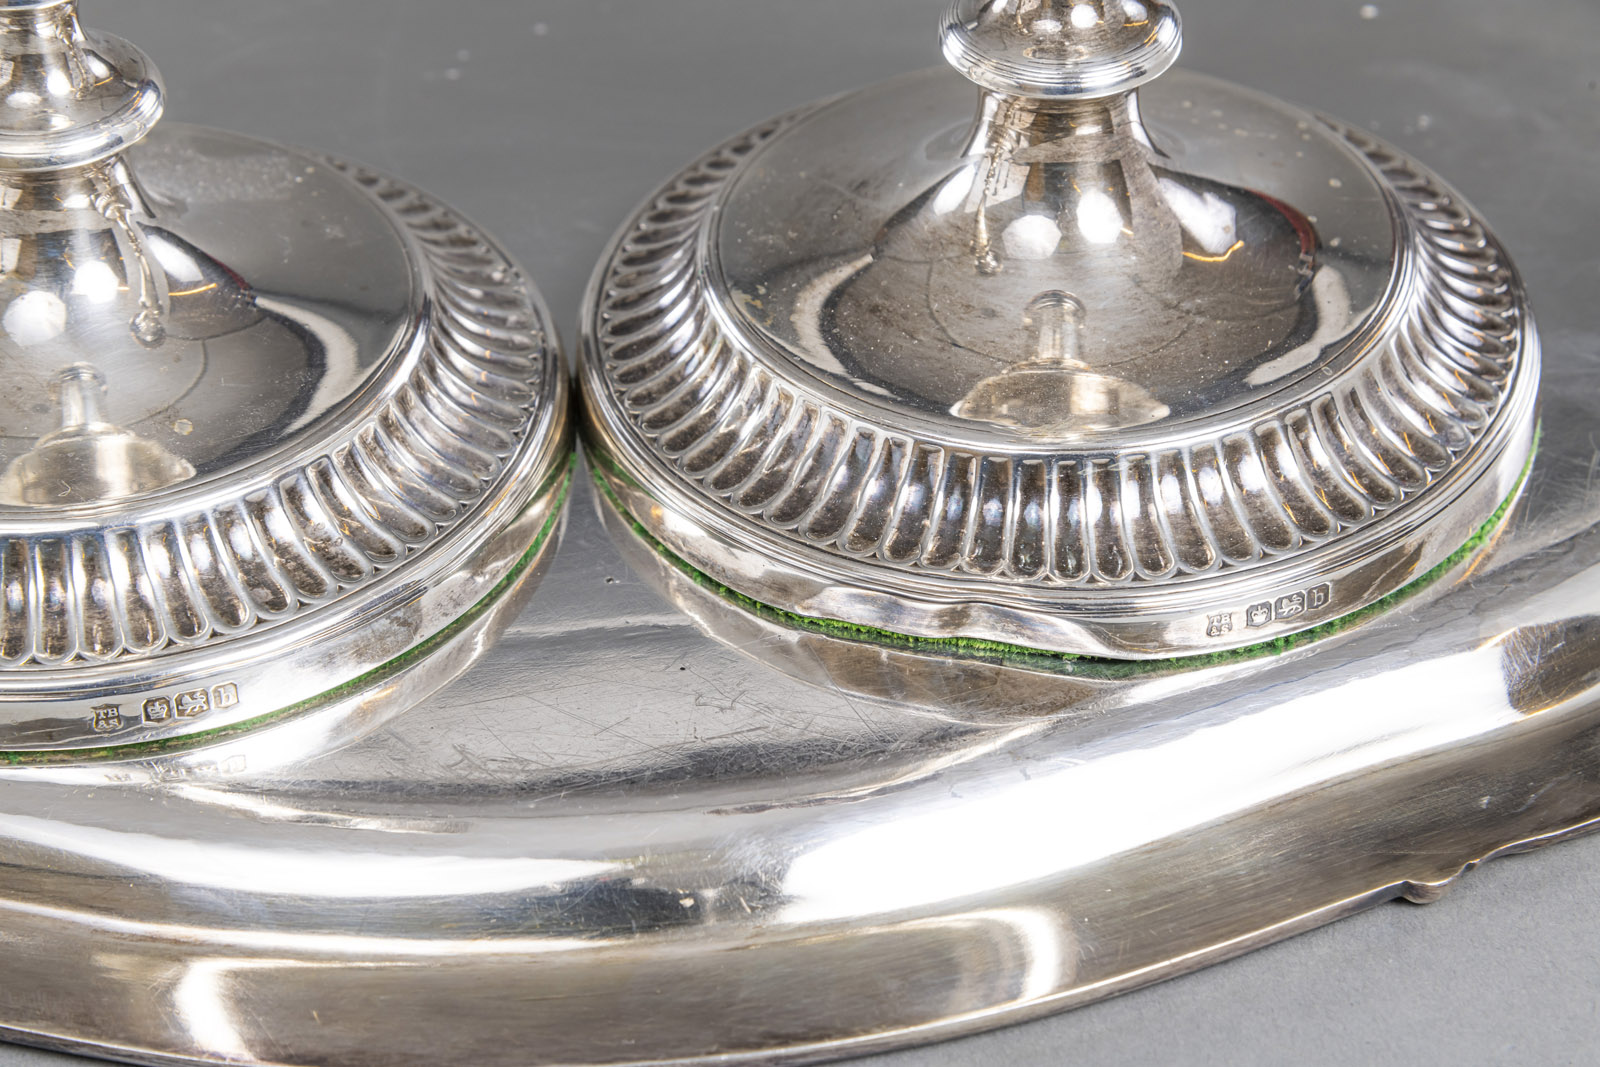 TWO PAIR OF LONDON SILVER CANDLESTICKS AND A GERMAN TRAY - Image 5 of 8